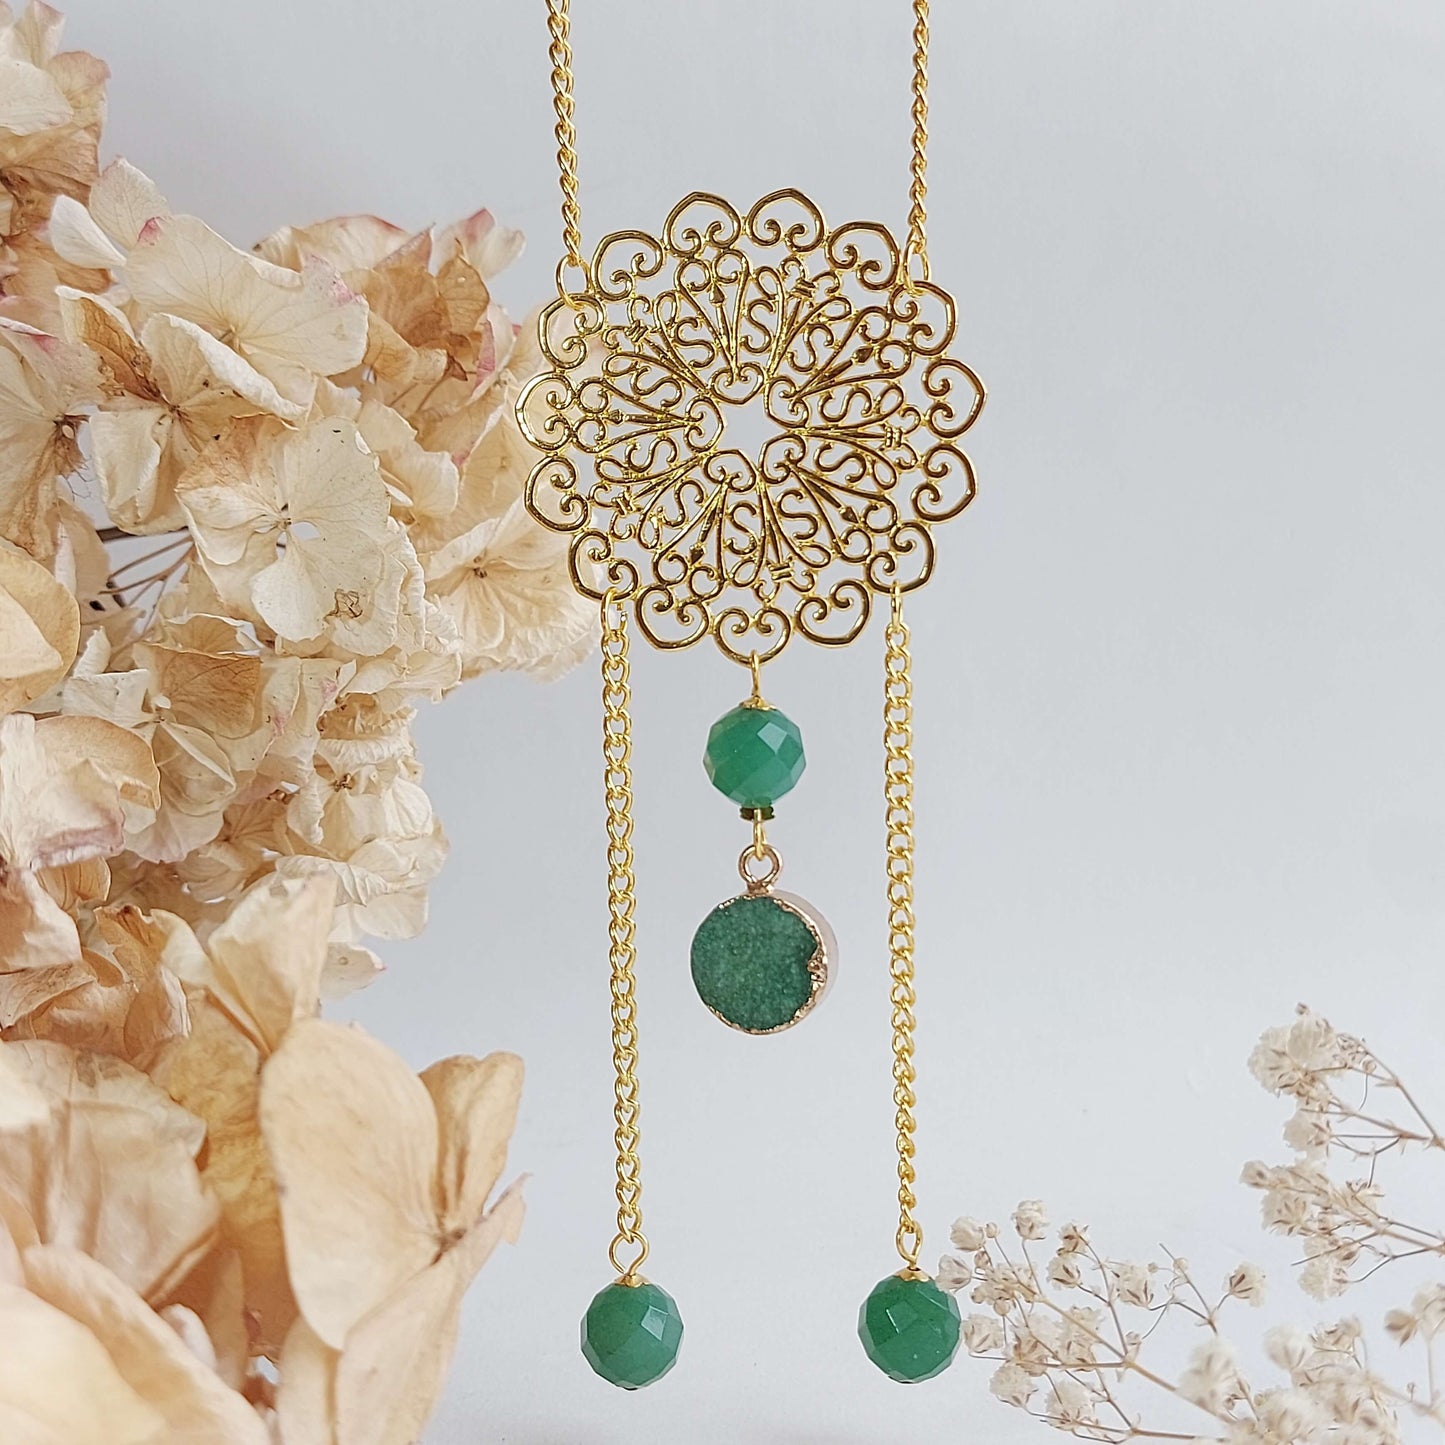 LUCKY VIBES Boho Necklace with Aventurine